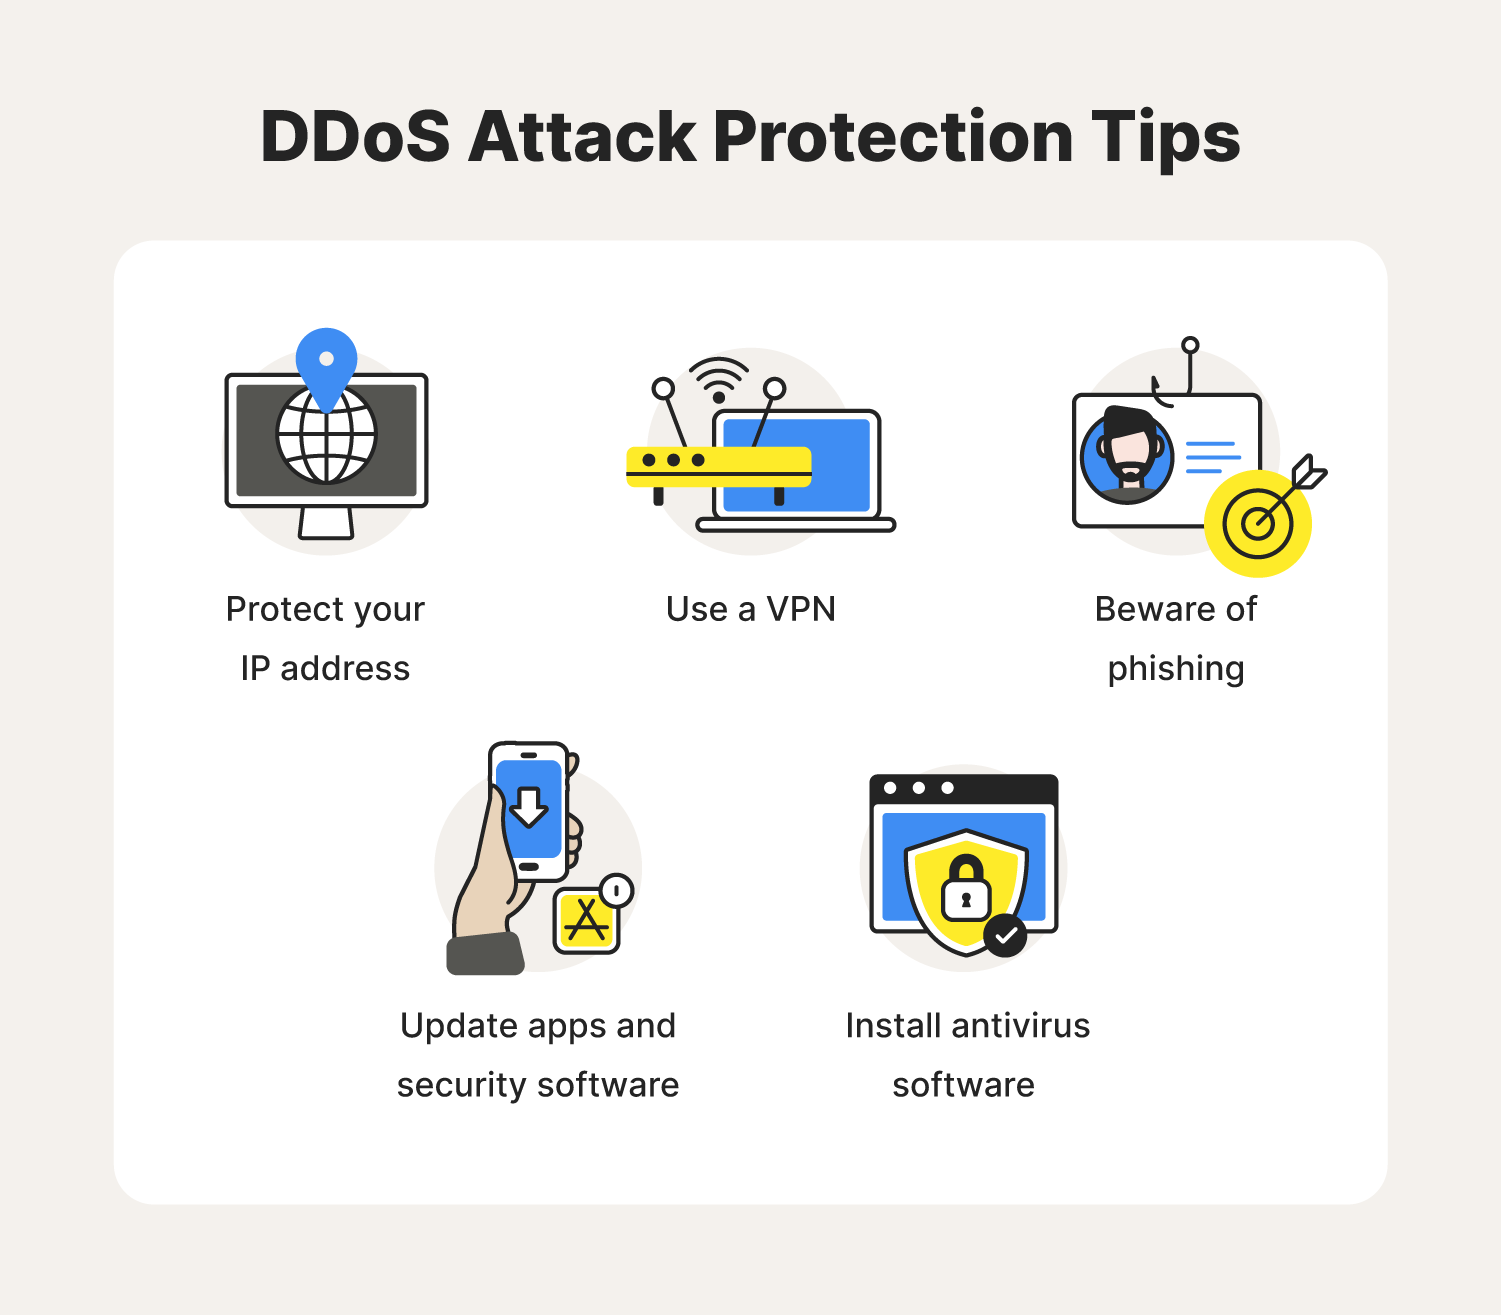 Five illustrations accompany DDoS attack protection tips.